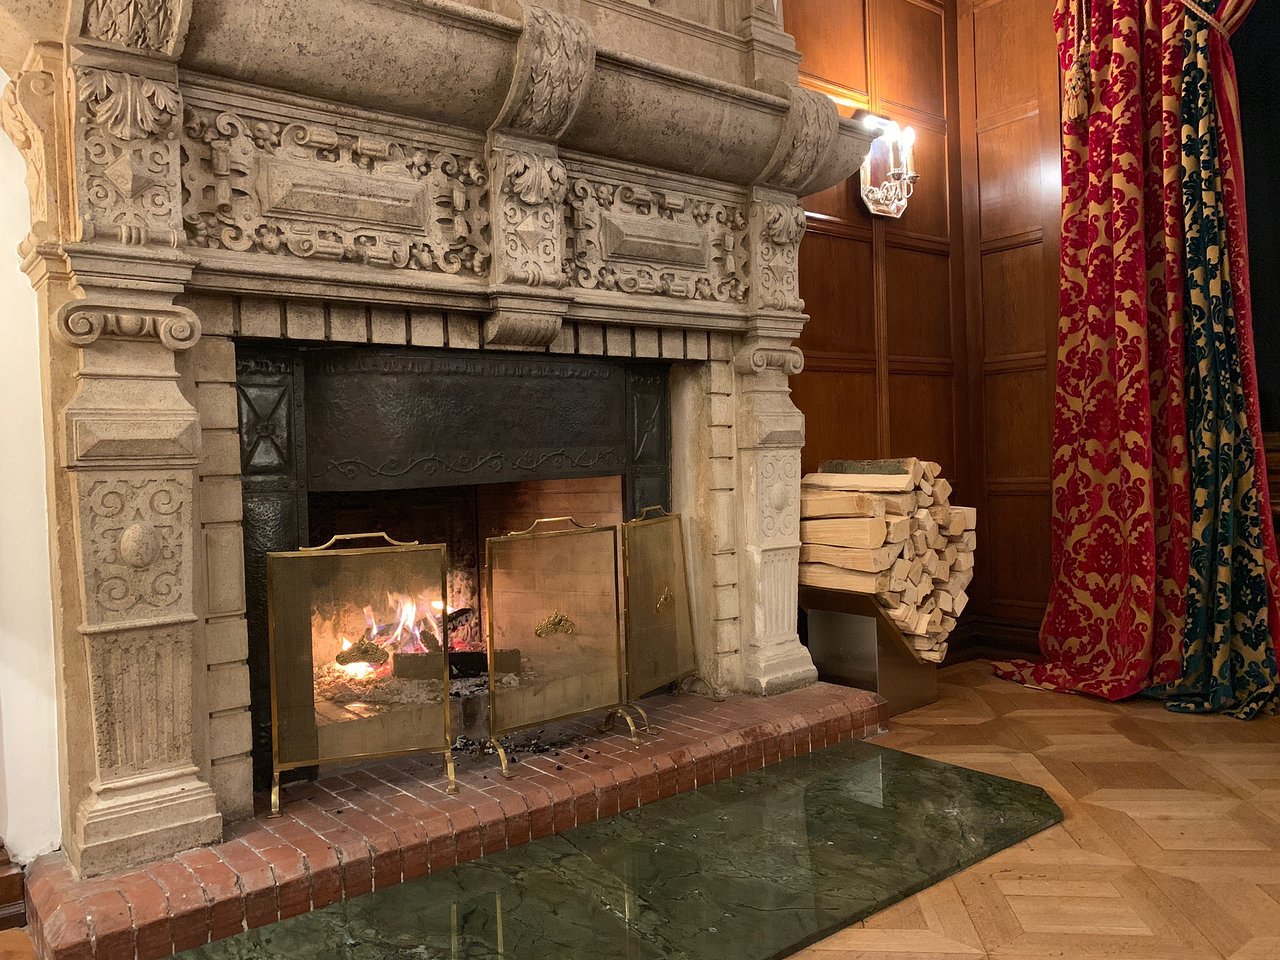 Olympia Fireplace and Spa Unique Carlton Hotel St Moritz Updated 2019 Prices & Reviews